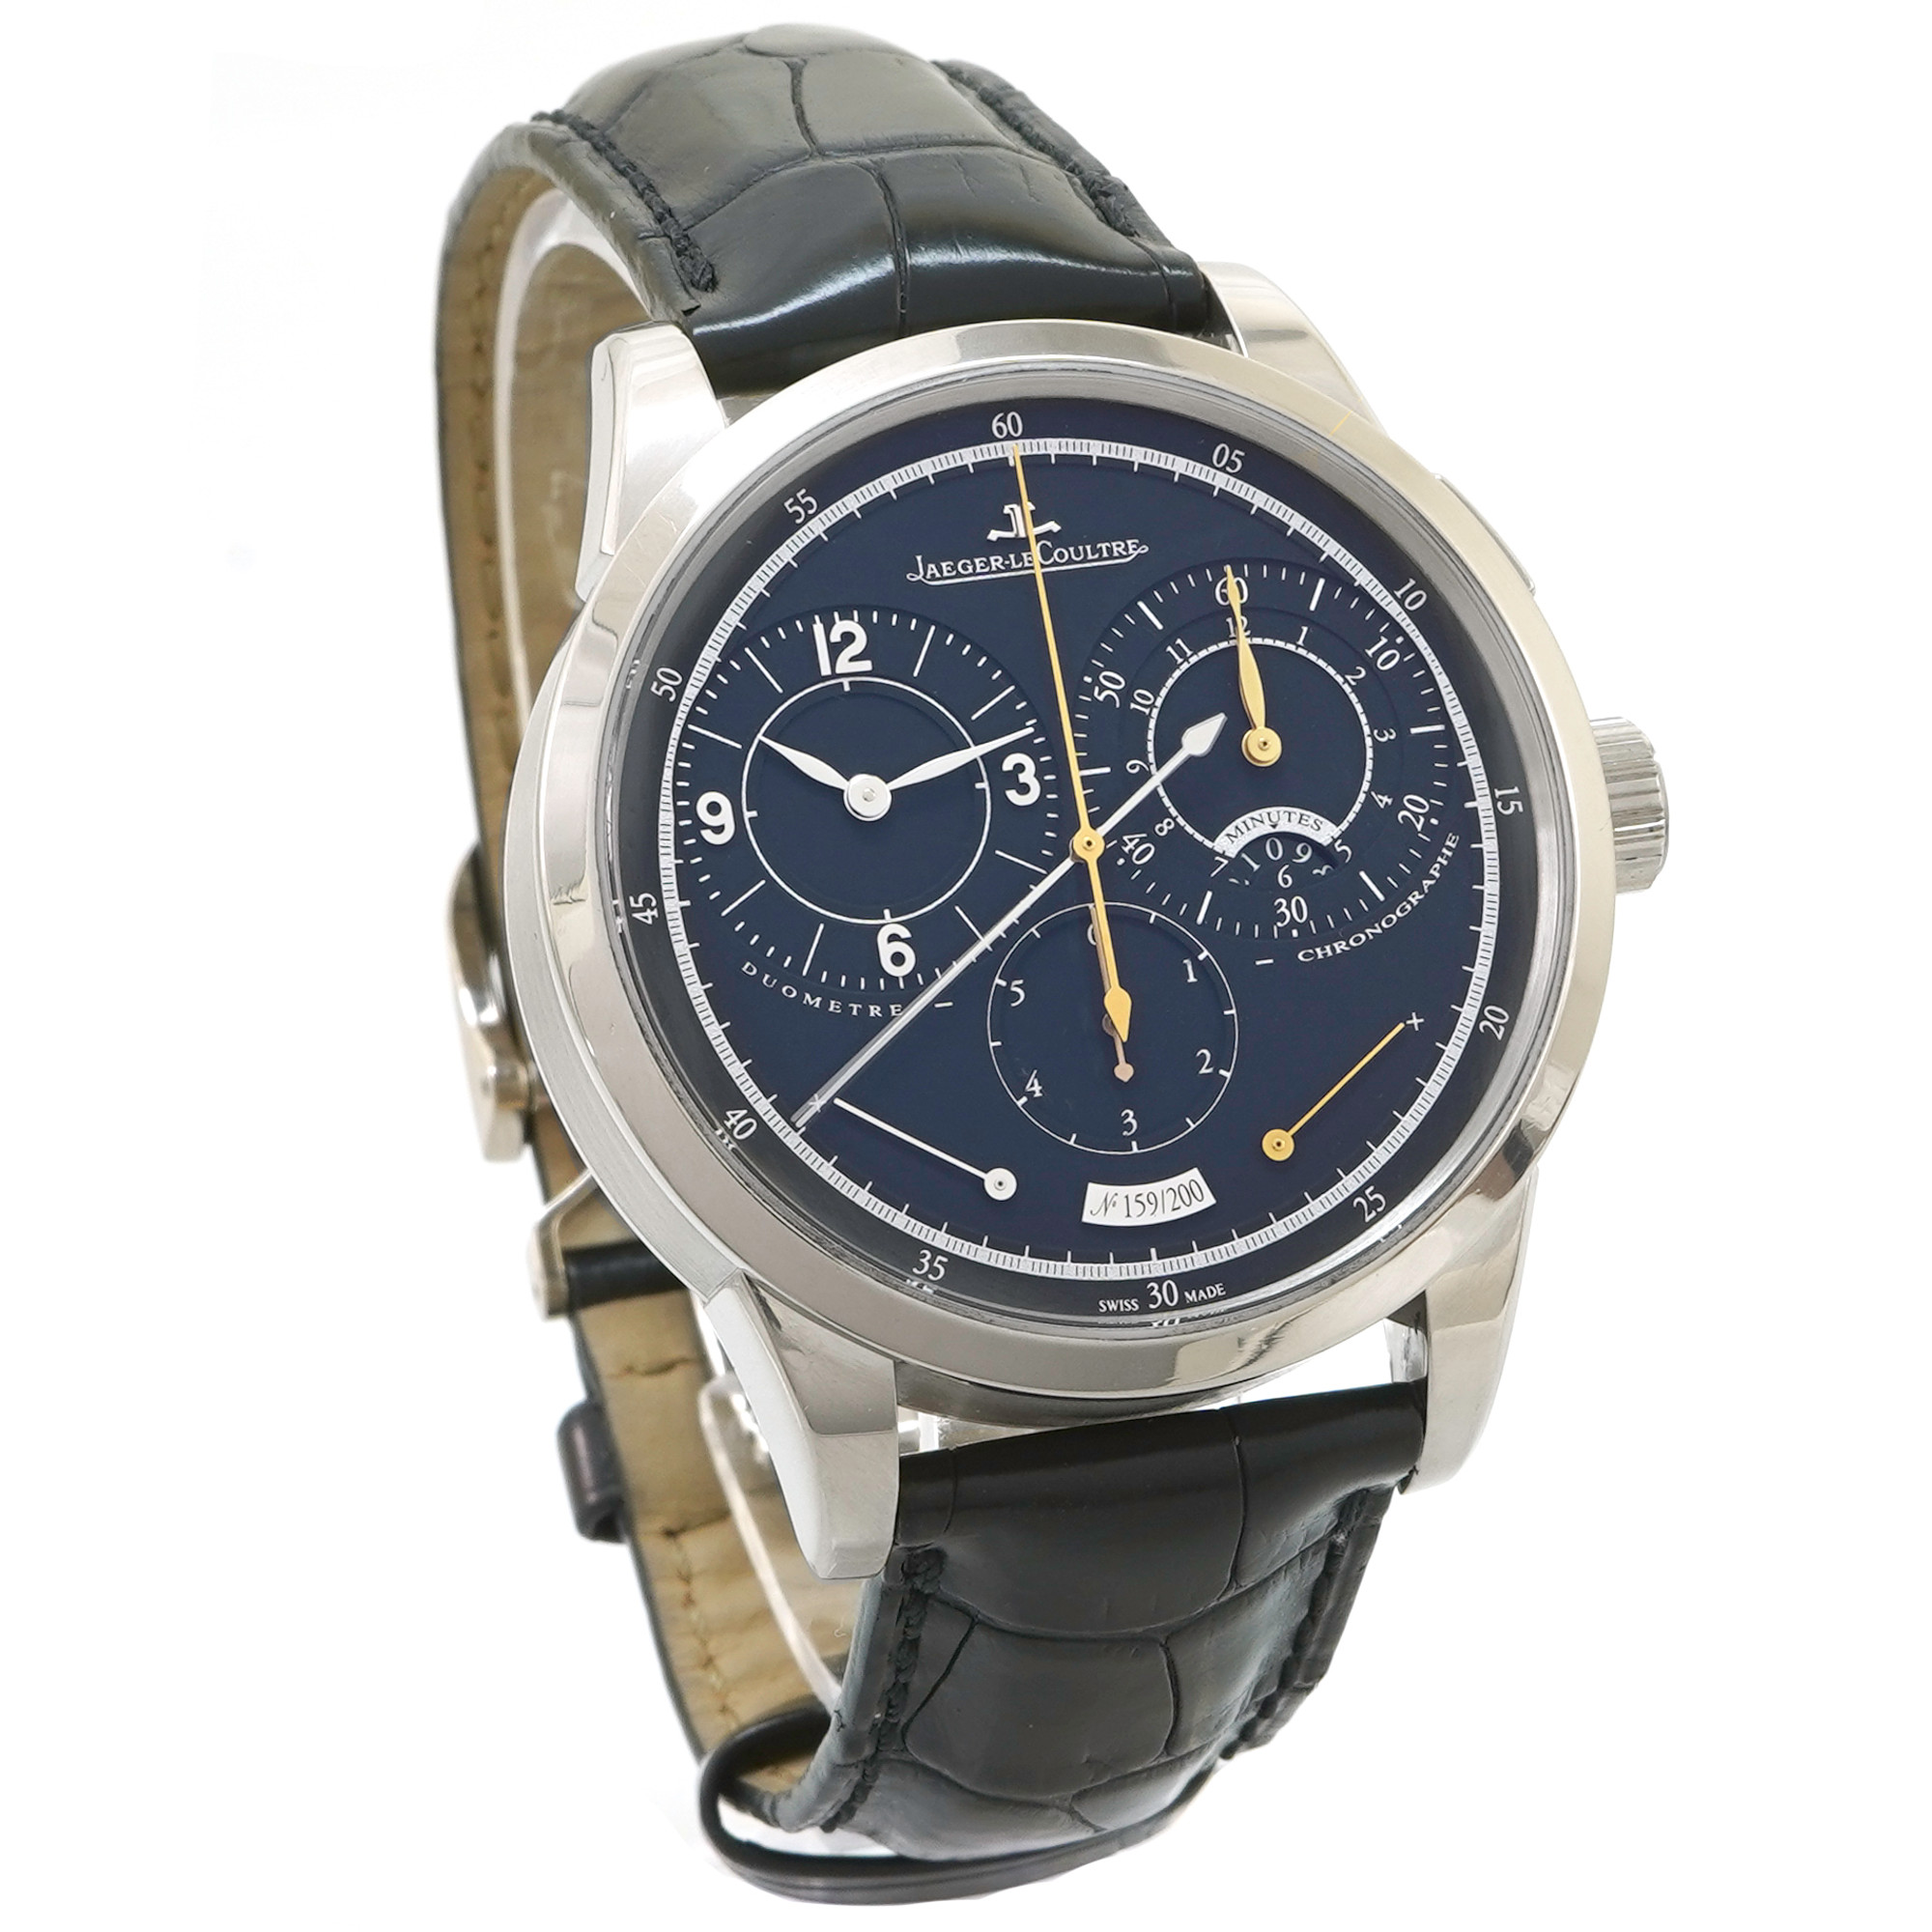 Jaeger LeCoultre Duometre Chronograph Q6013470 *White Gold* *Limited Edition* - Inventory 4839